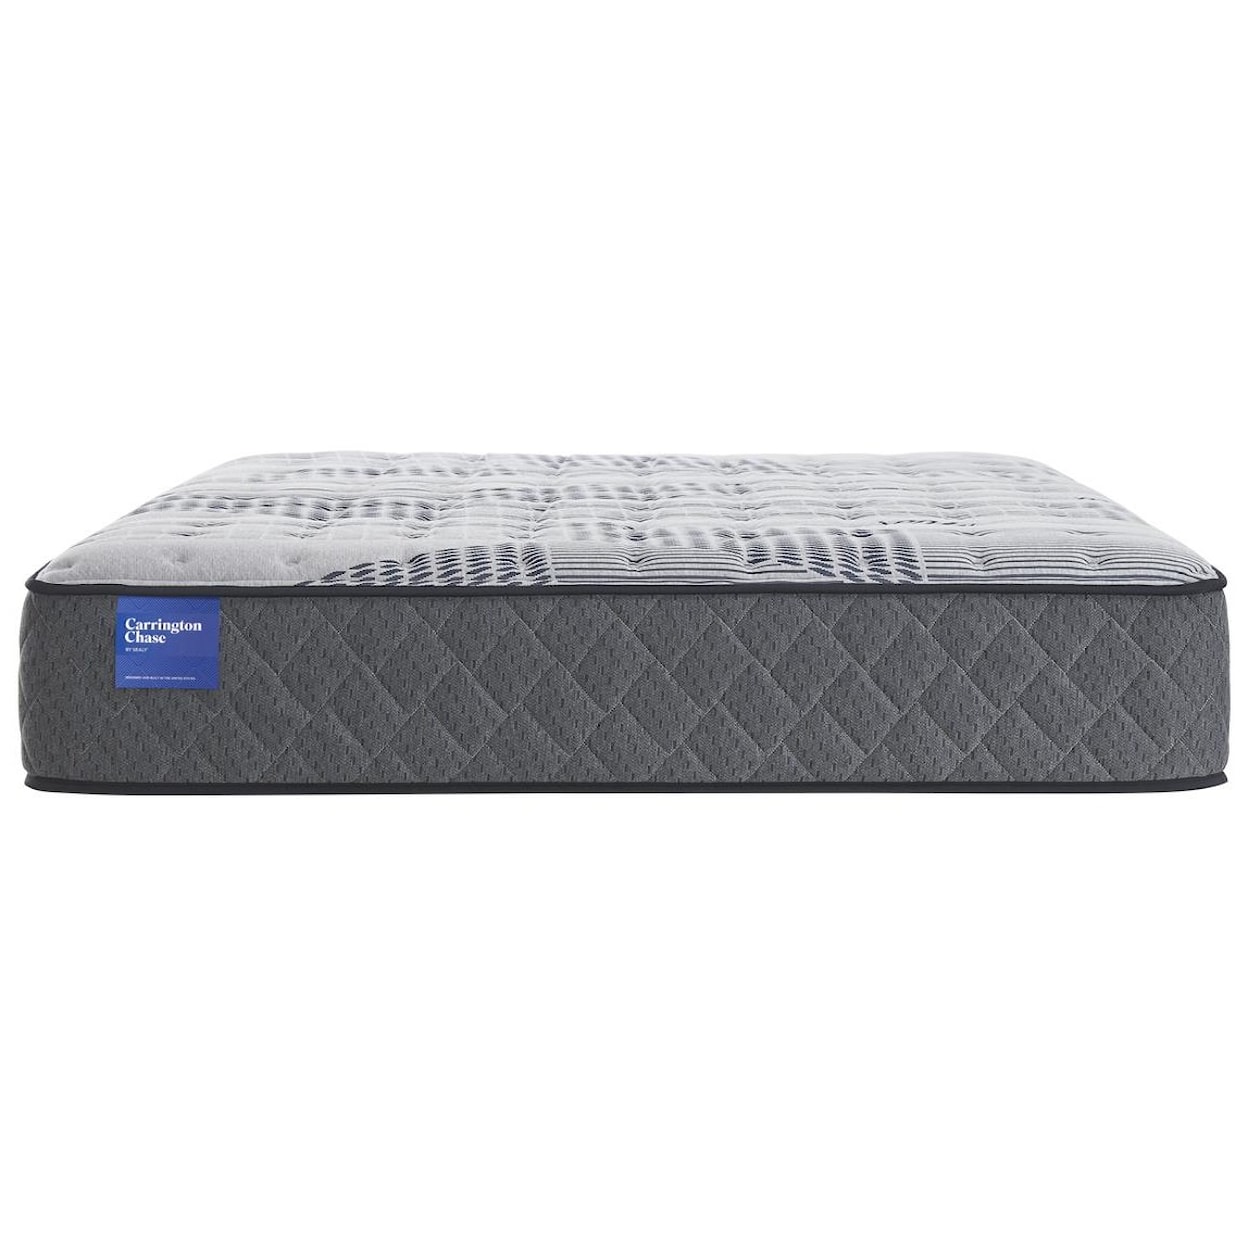 Sealy Sealy Belgrave Queen 10.5" Cushion Firm Mattress